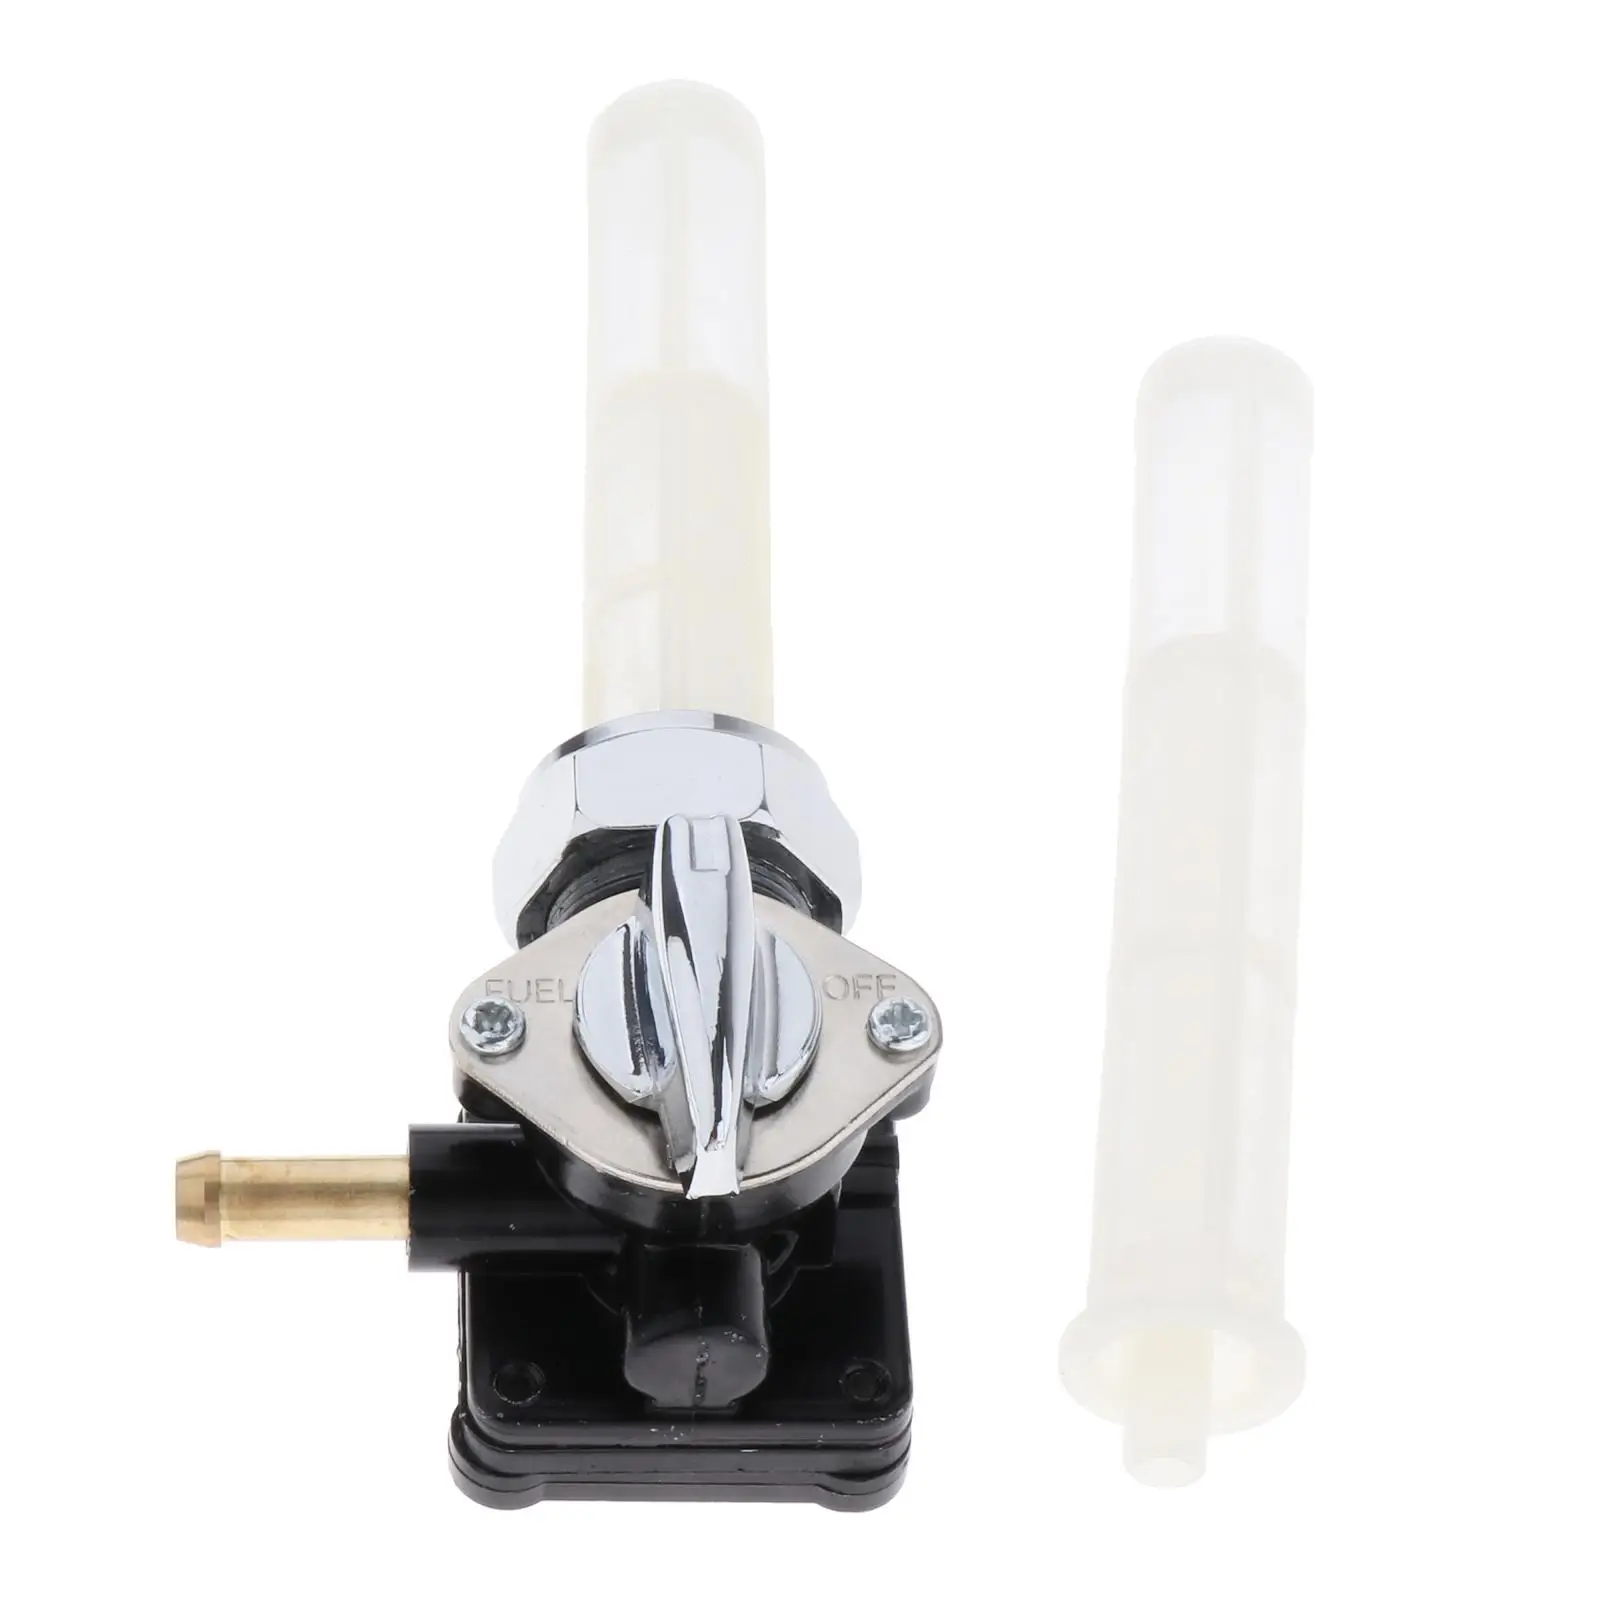 Motorcycle Fuel Switch Valve Petcock Gas Shut Off Switch for FXST FLT Parts Motorcycle Accessories